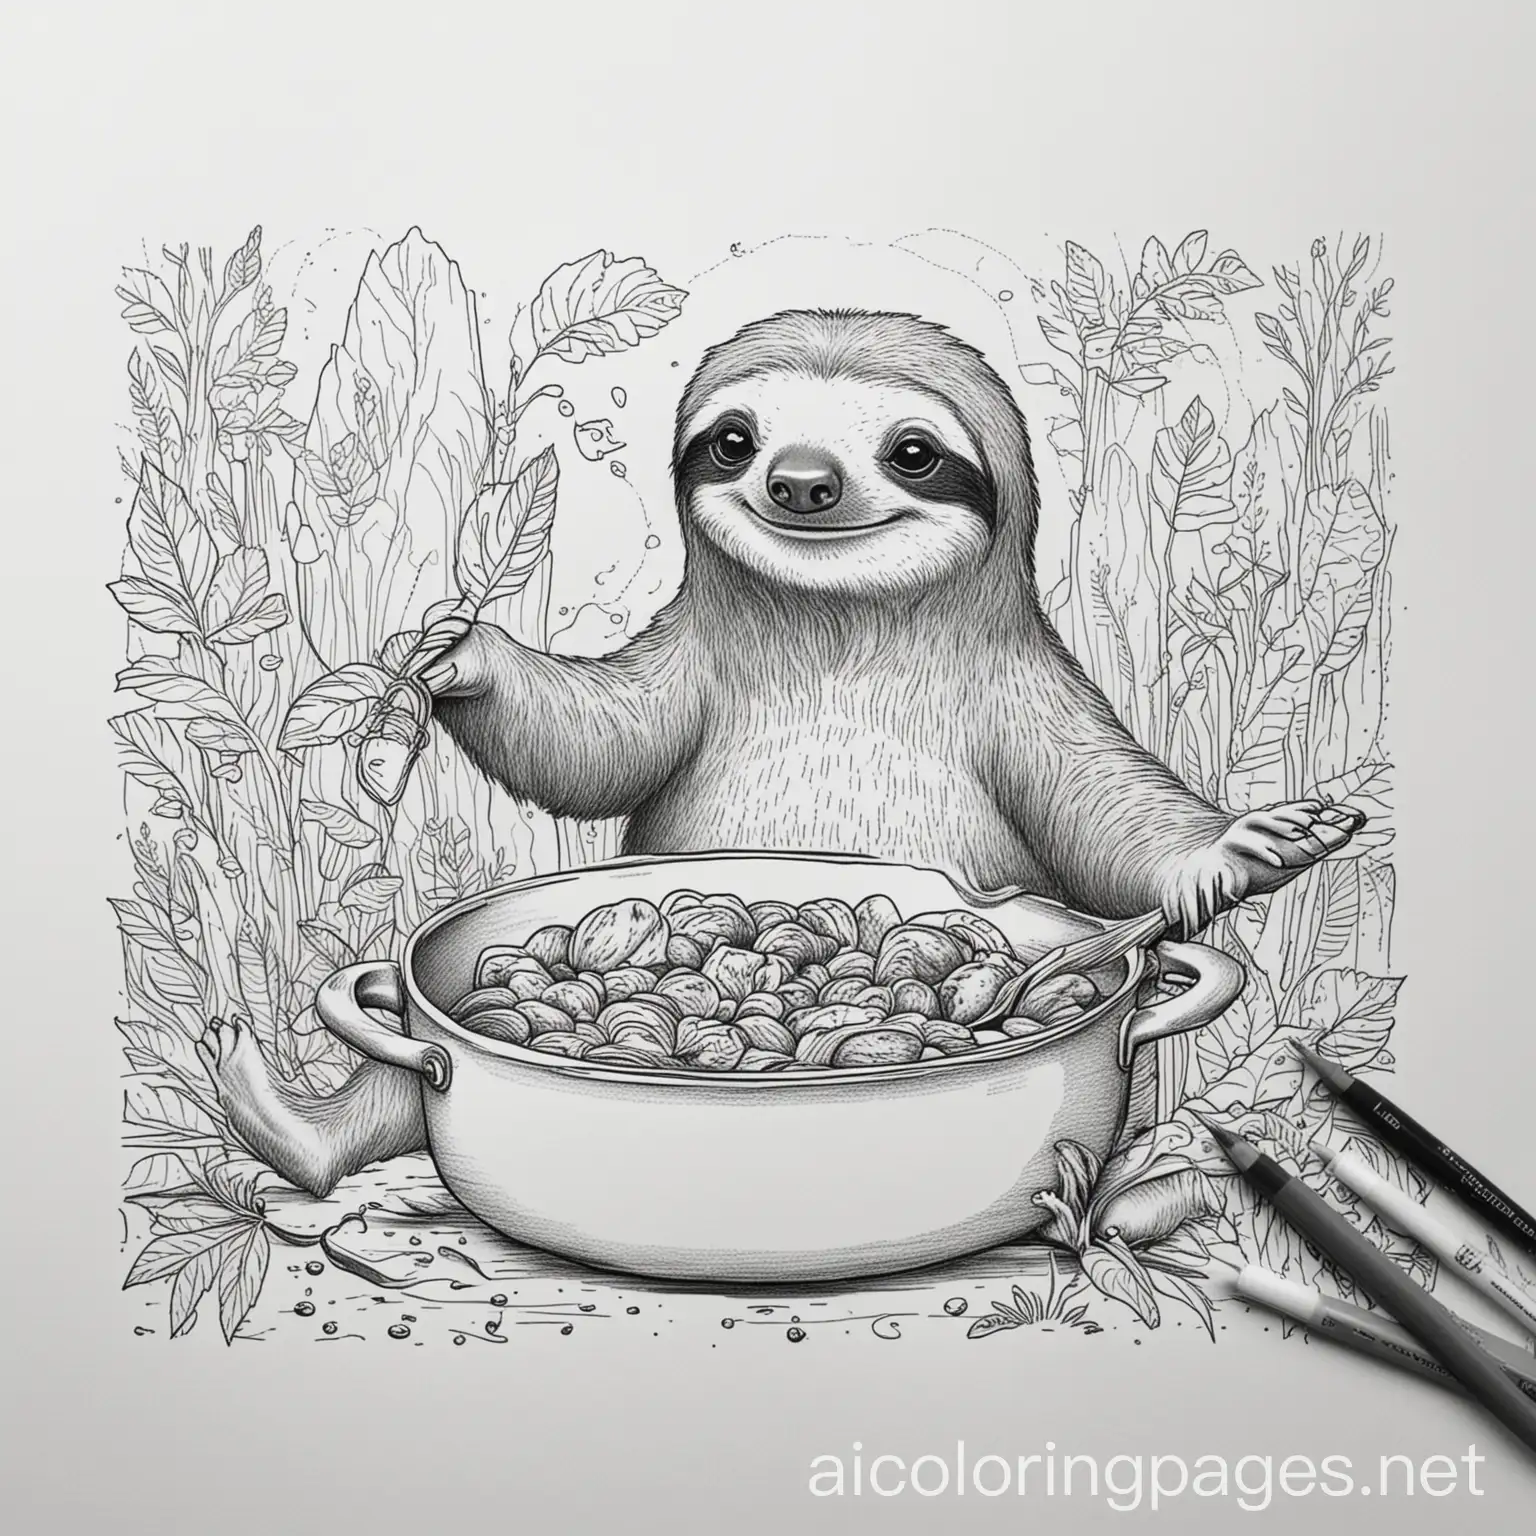 Sloths cooking, Coloring Page, black and white, line art, white background, Simplicity, Ample White Space. The background of the coloring page is plain white to make it easy for young children to color within the lines. The outlines of all the subjects are easy to distinguish, making it simple for kids to color without too much difficulty